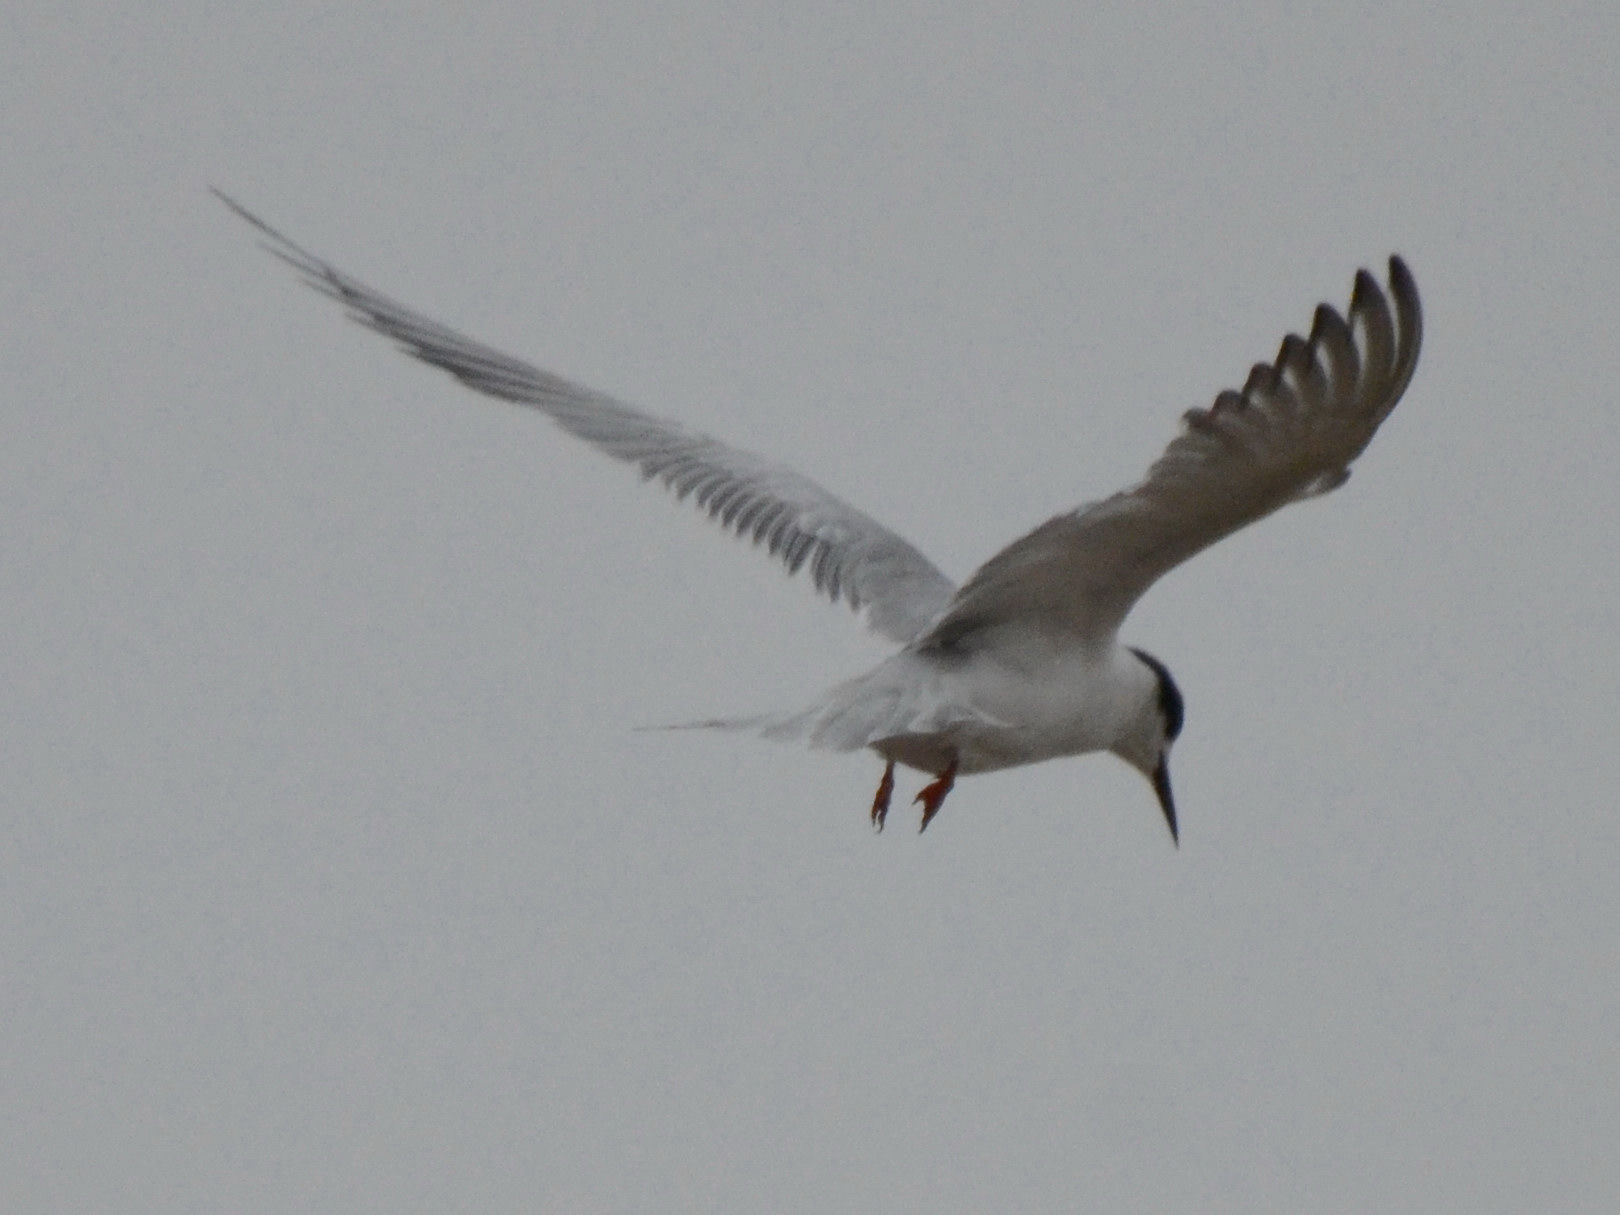 Click picture to see more Common Terns.